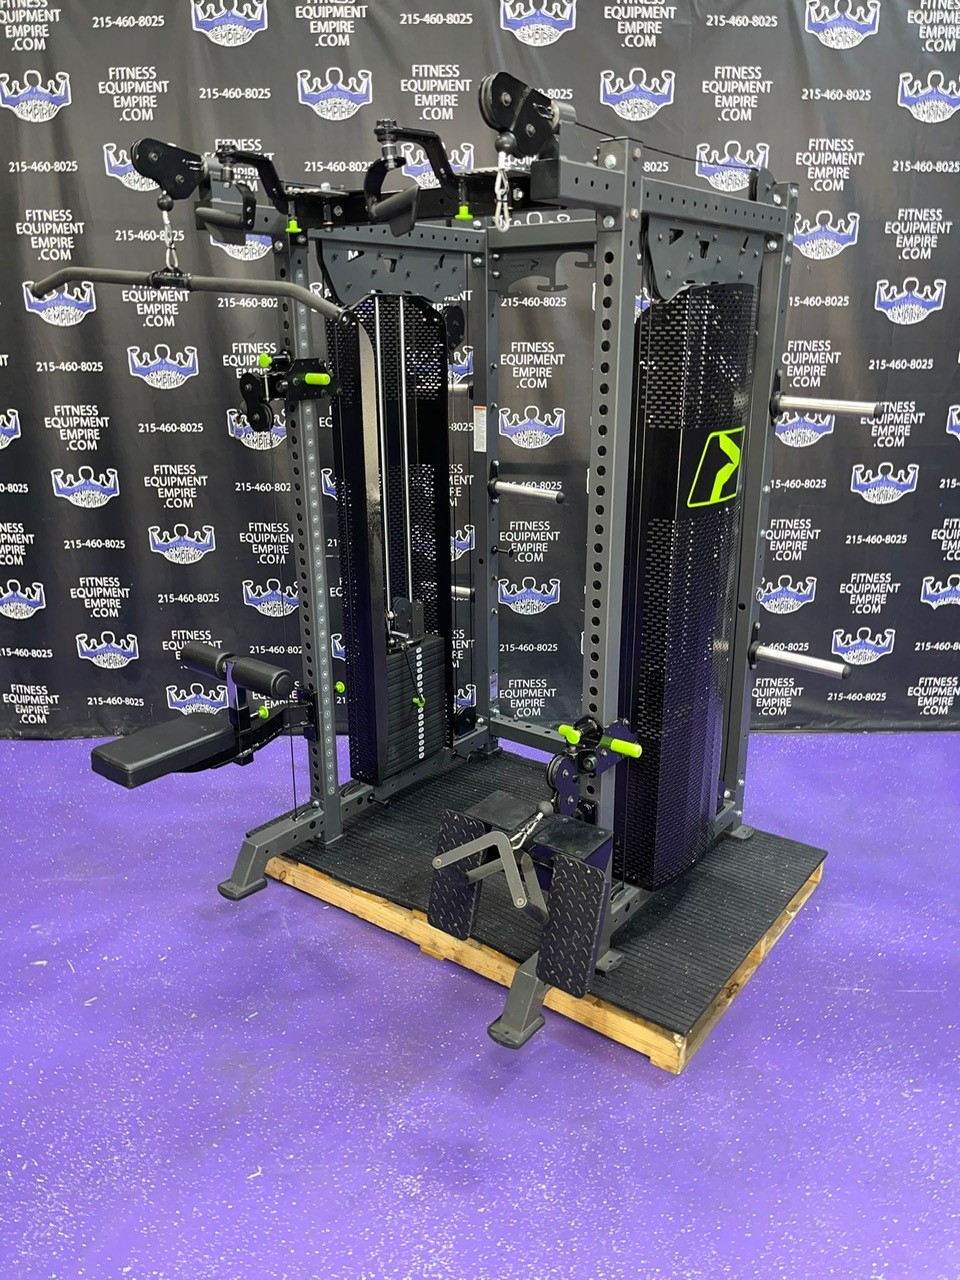 Prime Prodigy HLP Plate Loaded Rack